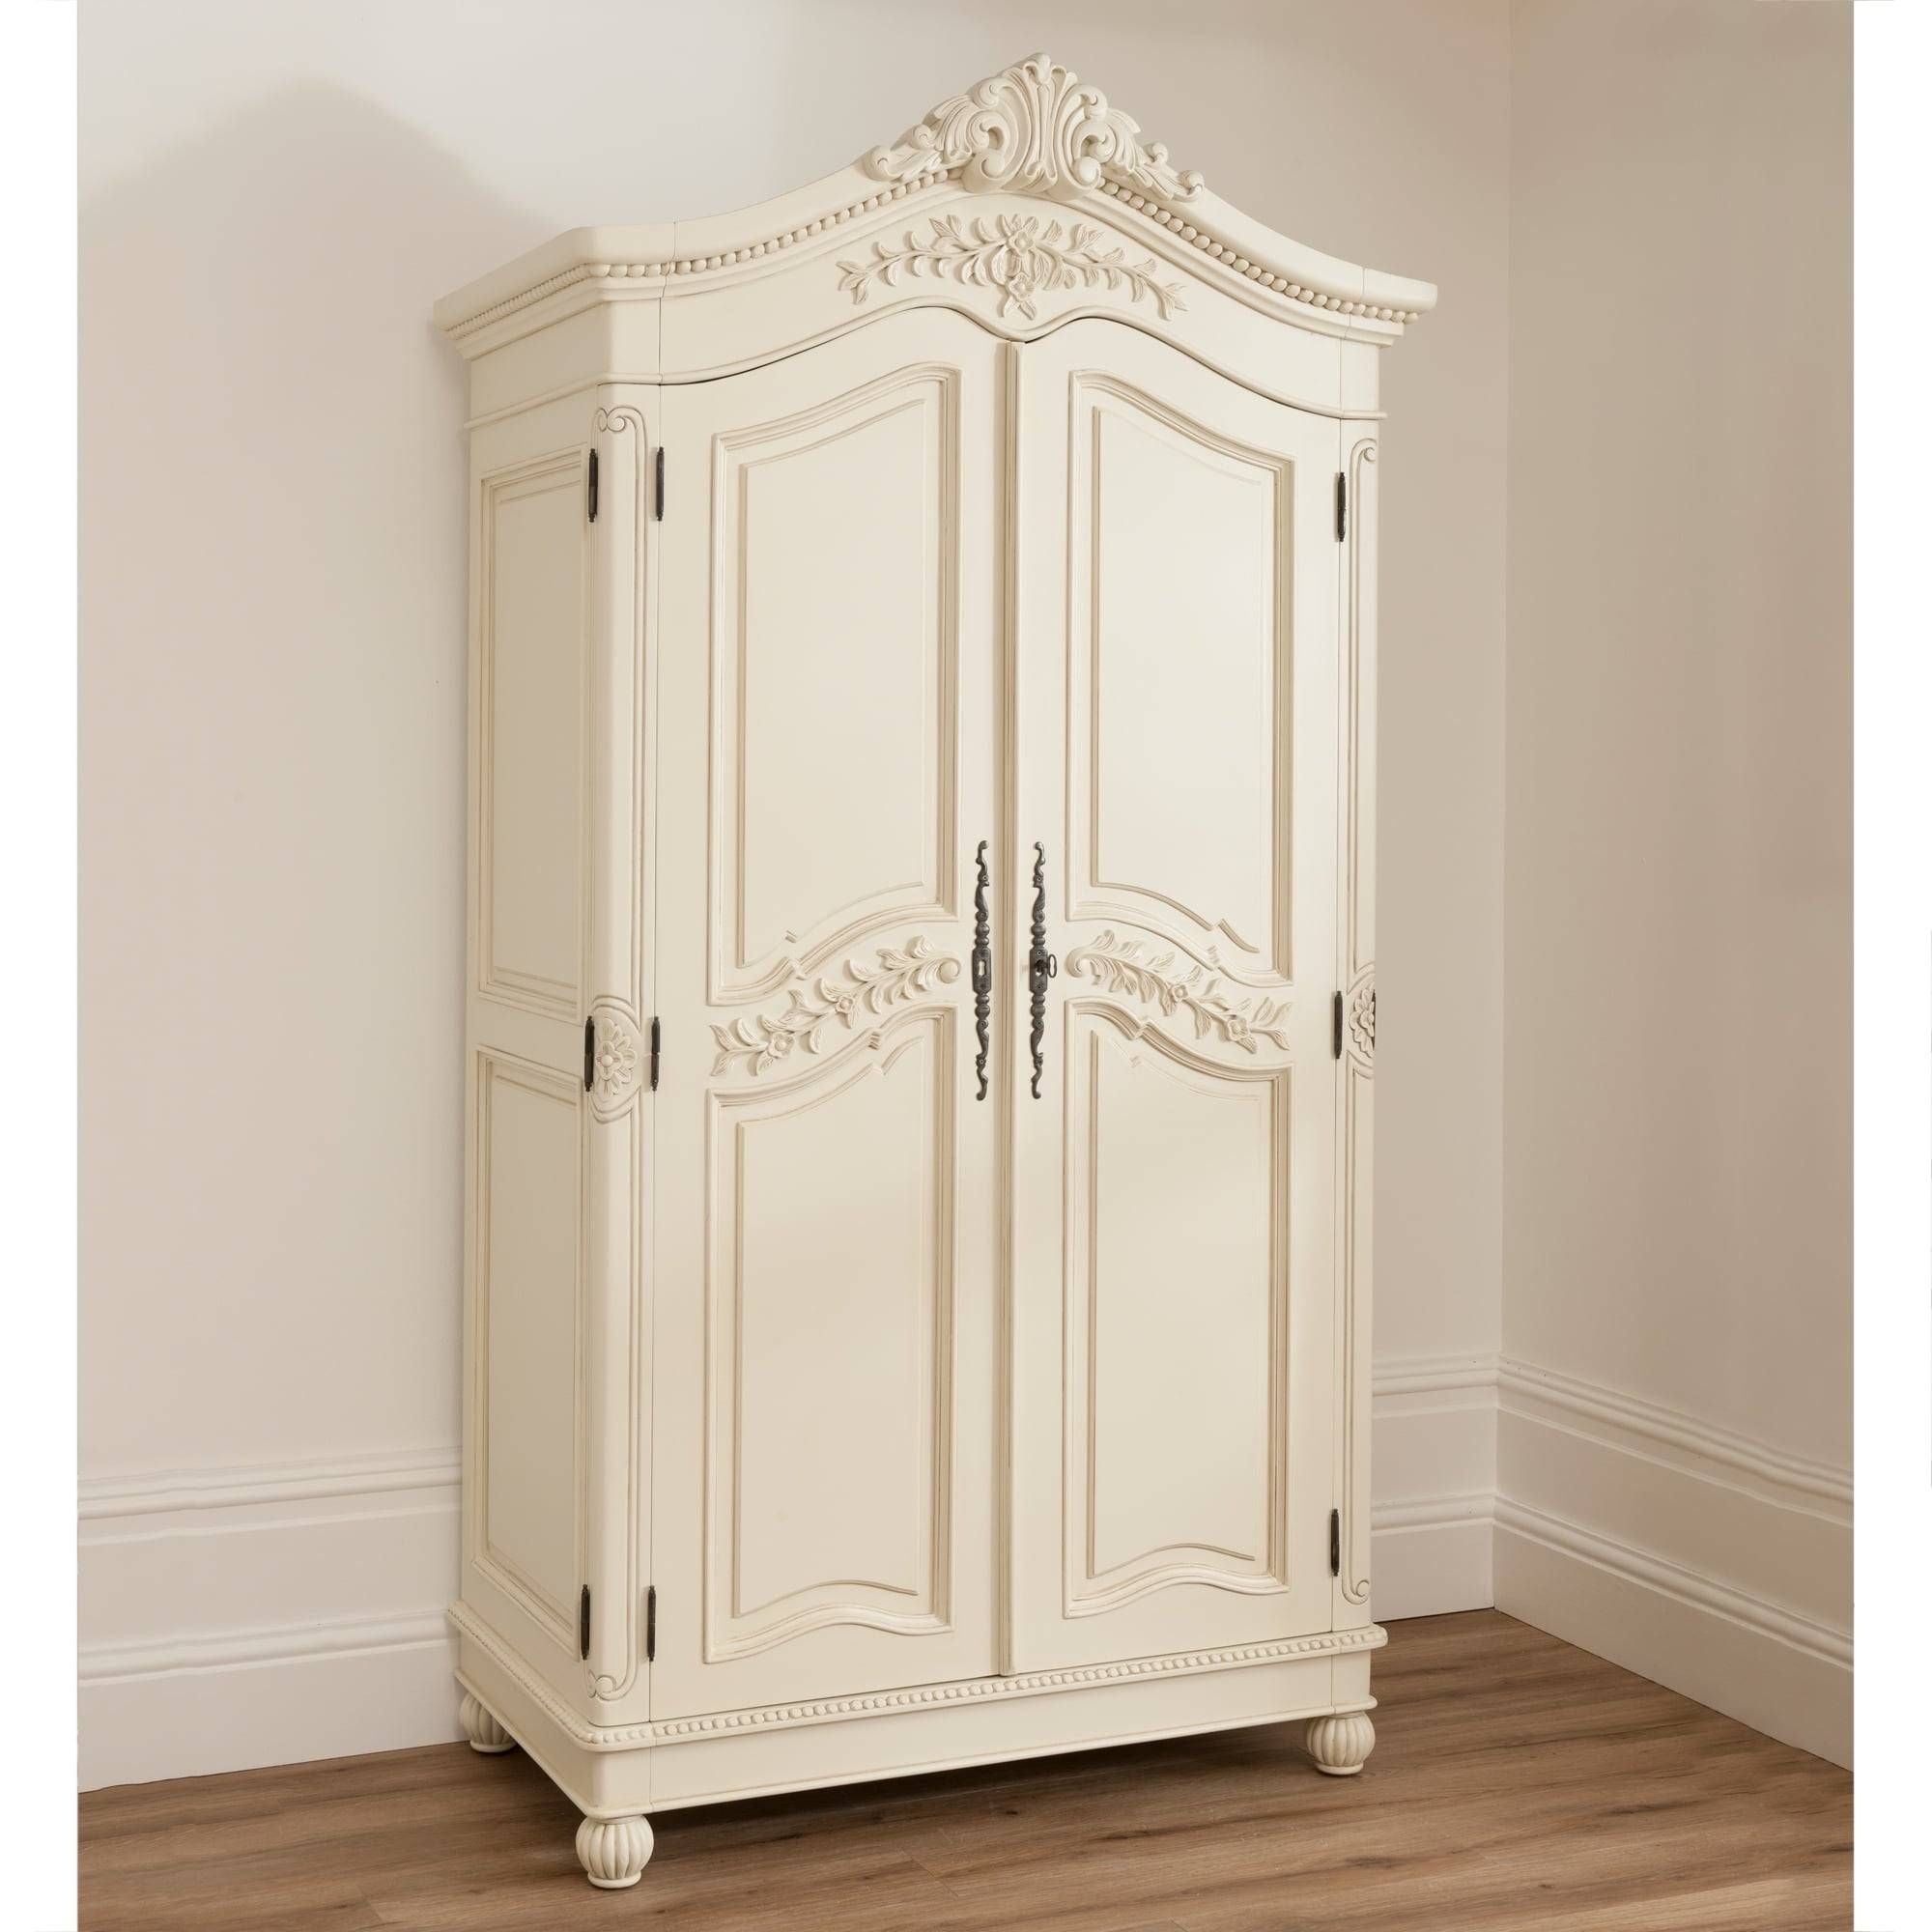 Bordeaux Ivory Shabby Chic Wardrobe | Shabby Chic Furniture In Bordeaux Wardrobes (View 2 of 15)